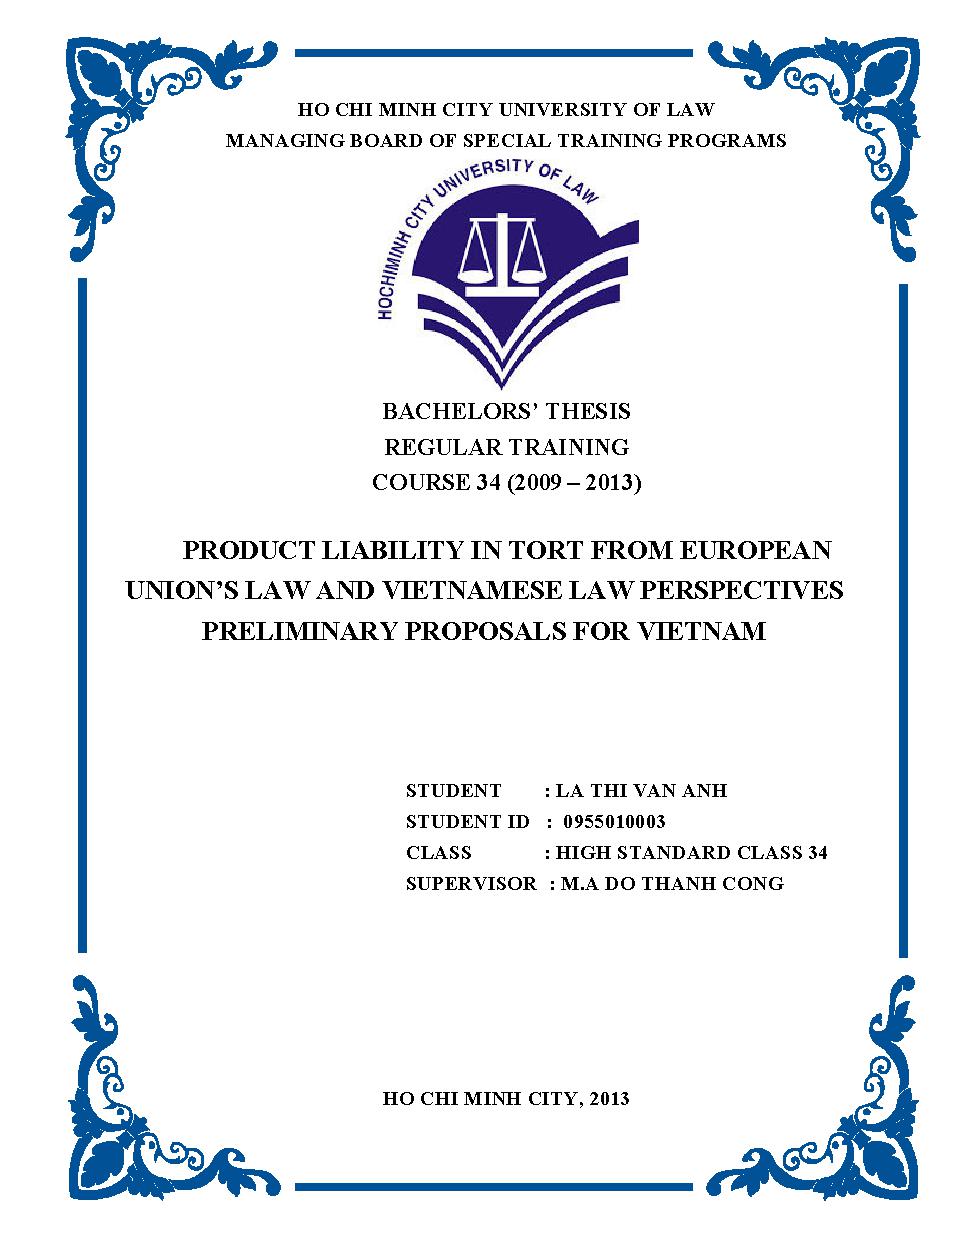 Product liability in tort from european union's law and vietnamese law perspectives preliminary proposals for vietnam